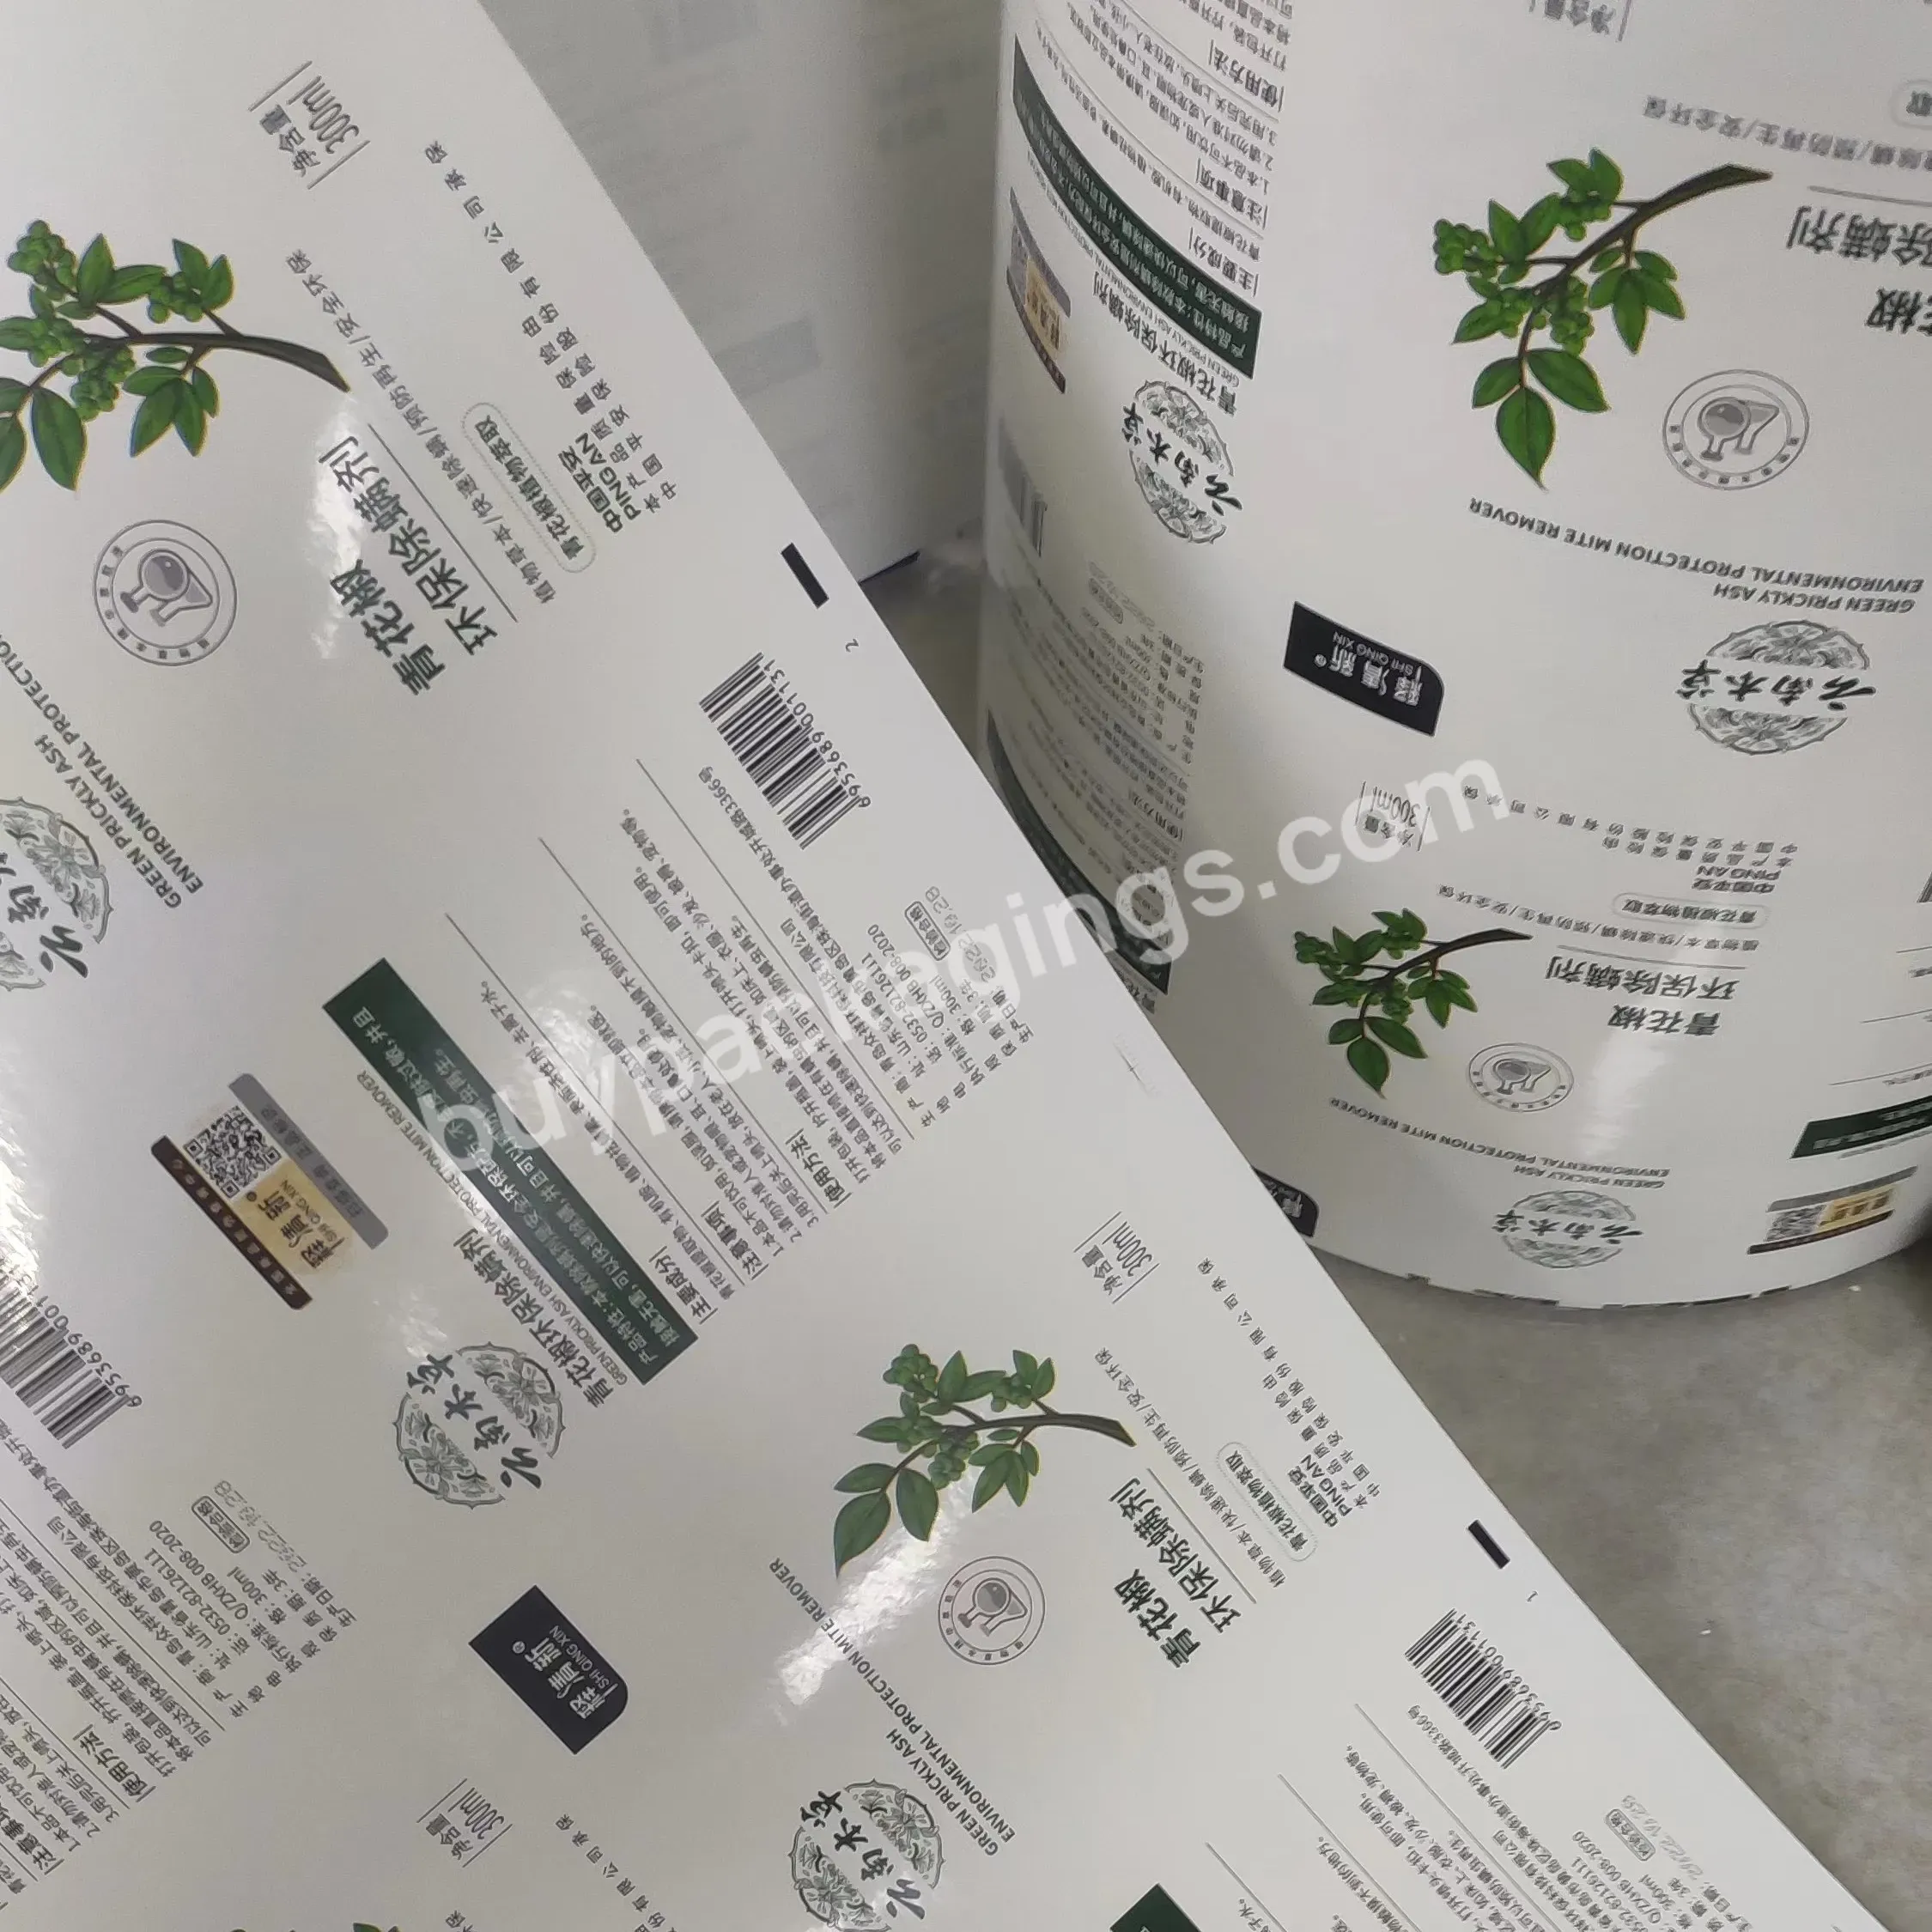 Custom Factory Pinted Beauty Care Products Bottle Label Roll Waterproof Logo Body Care Adhesive Printing Sticker - Buy Beauty Care Bottle Label,Factory Printed Stickers,Adhesive Label Sticker.